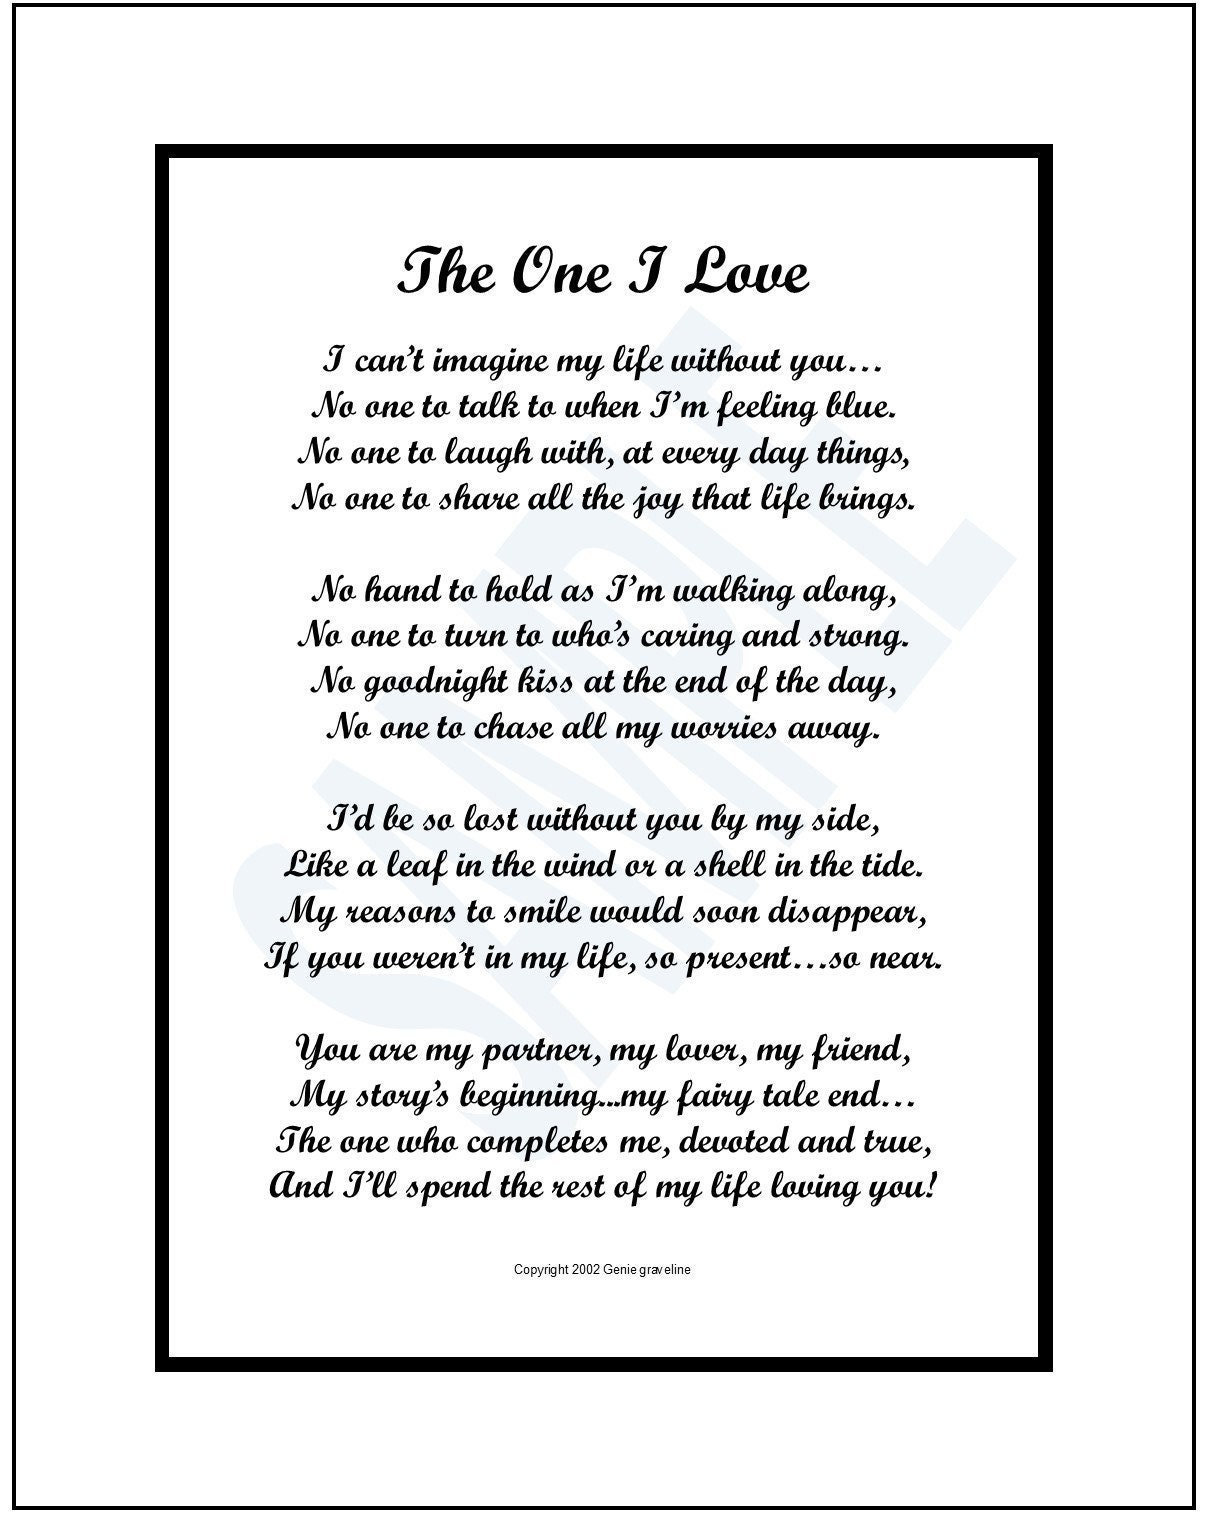 Love Poem for Husband Wife DIGITAL DOWNLOAD Marriage image picture picture